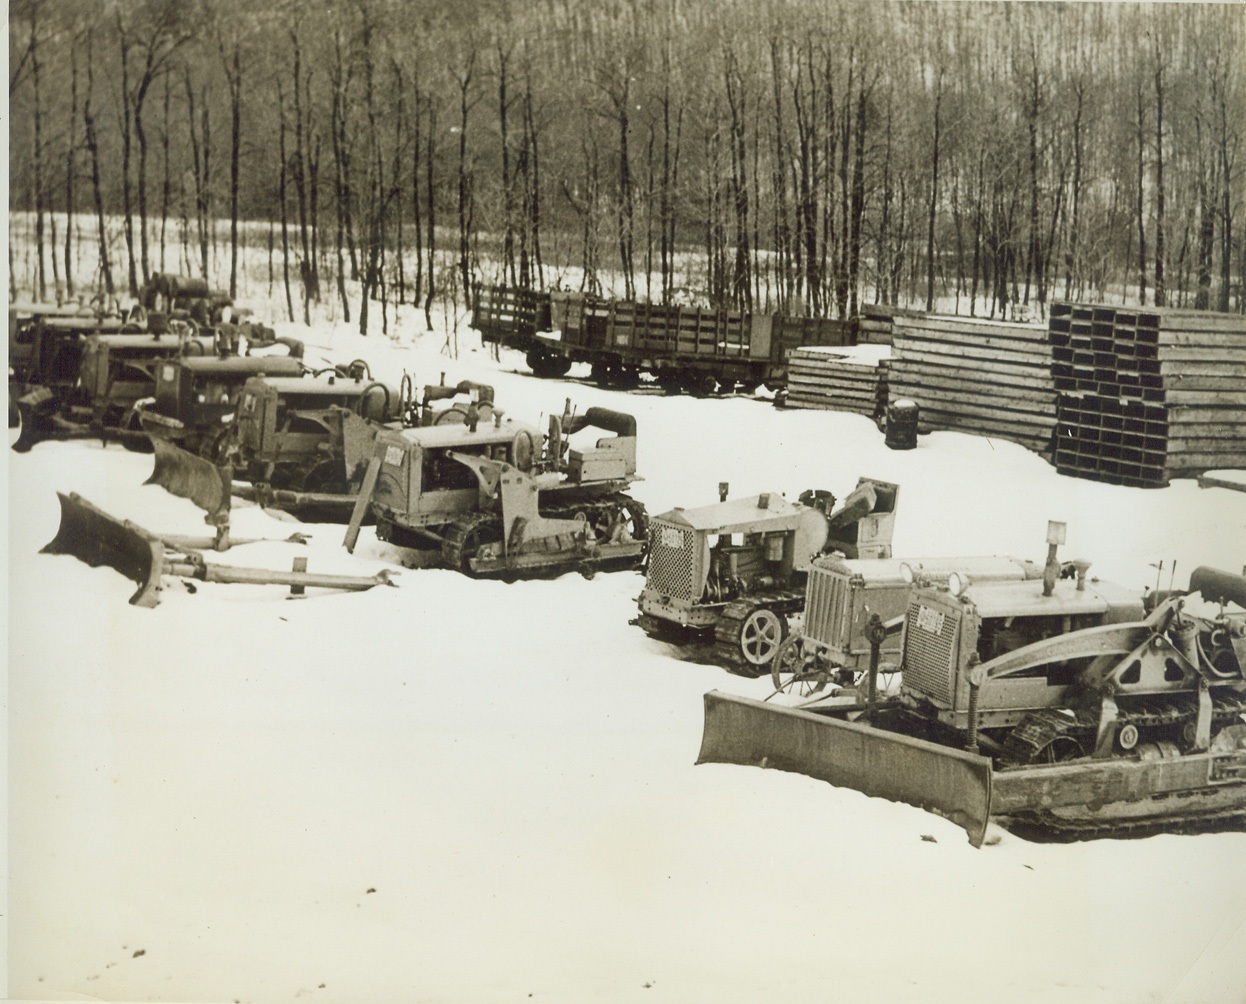 DEFENSE MATERIAL BEING WASTED BY CCC, 3/9/1942. Valuable and vital defense material is being wasted and wrecked by the Federal Civilian Conservation Corps in the abandonment of some of its camps in Pennsylvania, according to a copyrighted story in the Philadelphia “Inquirer,” March 8. While the war production board is attempting to utilize all “surplus war materials,” CCC storehouses are loaded to the ceiling with brand-new tools, the story states, and in spite of the dwindling civilian supply of all-wool clothes, brand-new, unpacked supplies of long underwear, uniforms, oilskin raincoats, rubber overshoes and even army blankets have been burned by the CCC. While Price Administrator Leon Henderson has announced it might be necessary to requisition tires from private owners for use of the armed forces, there is one CCC storehouse packed with at least 1200 good truck tires, some of them virtually new. While autos and trucks are being rationed, the CCC is permitting usable trucks to rust and rot in open fields, unprotected from severe winter weather. While there is a shortage of road equipment, graders and caterpillar tractors are wasting away in the same manner. This story was written about only certain camps in Pennsylvania – and there have been camps in 47 other states, many of which have been closed down. NEW YORK BUREAU These tractors left to rust in the snow of an open field might be doing their bit for national defense. Credit: ACME;